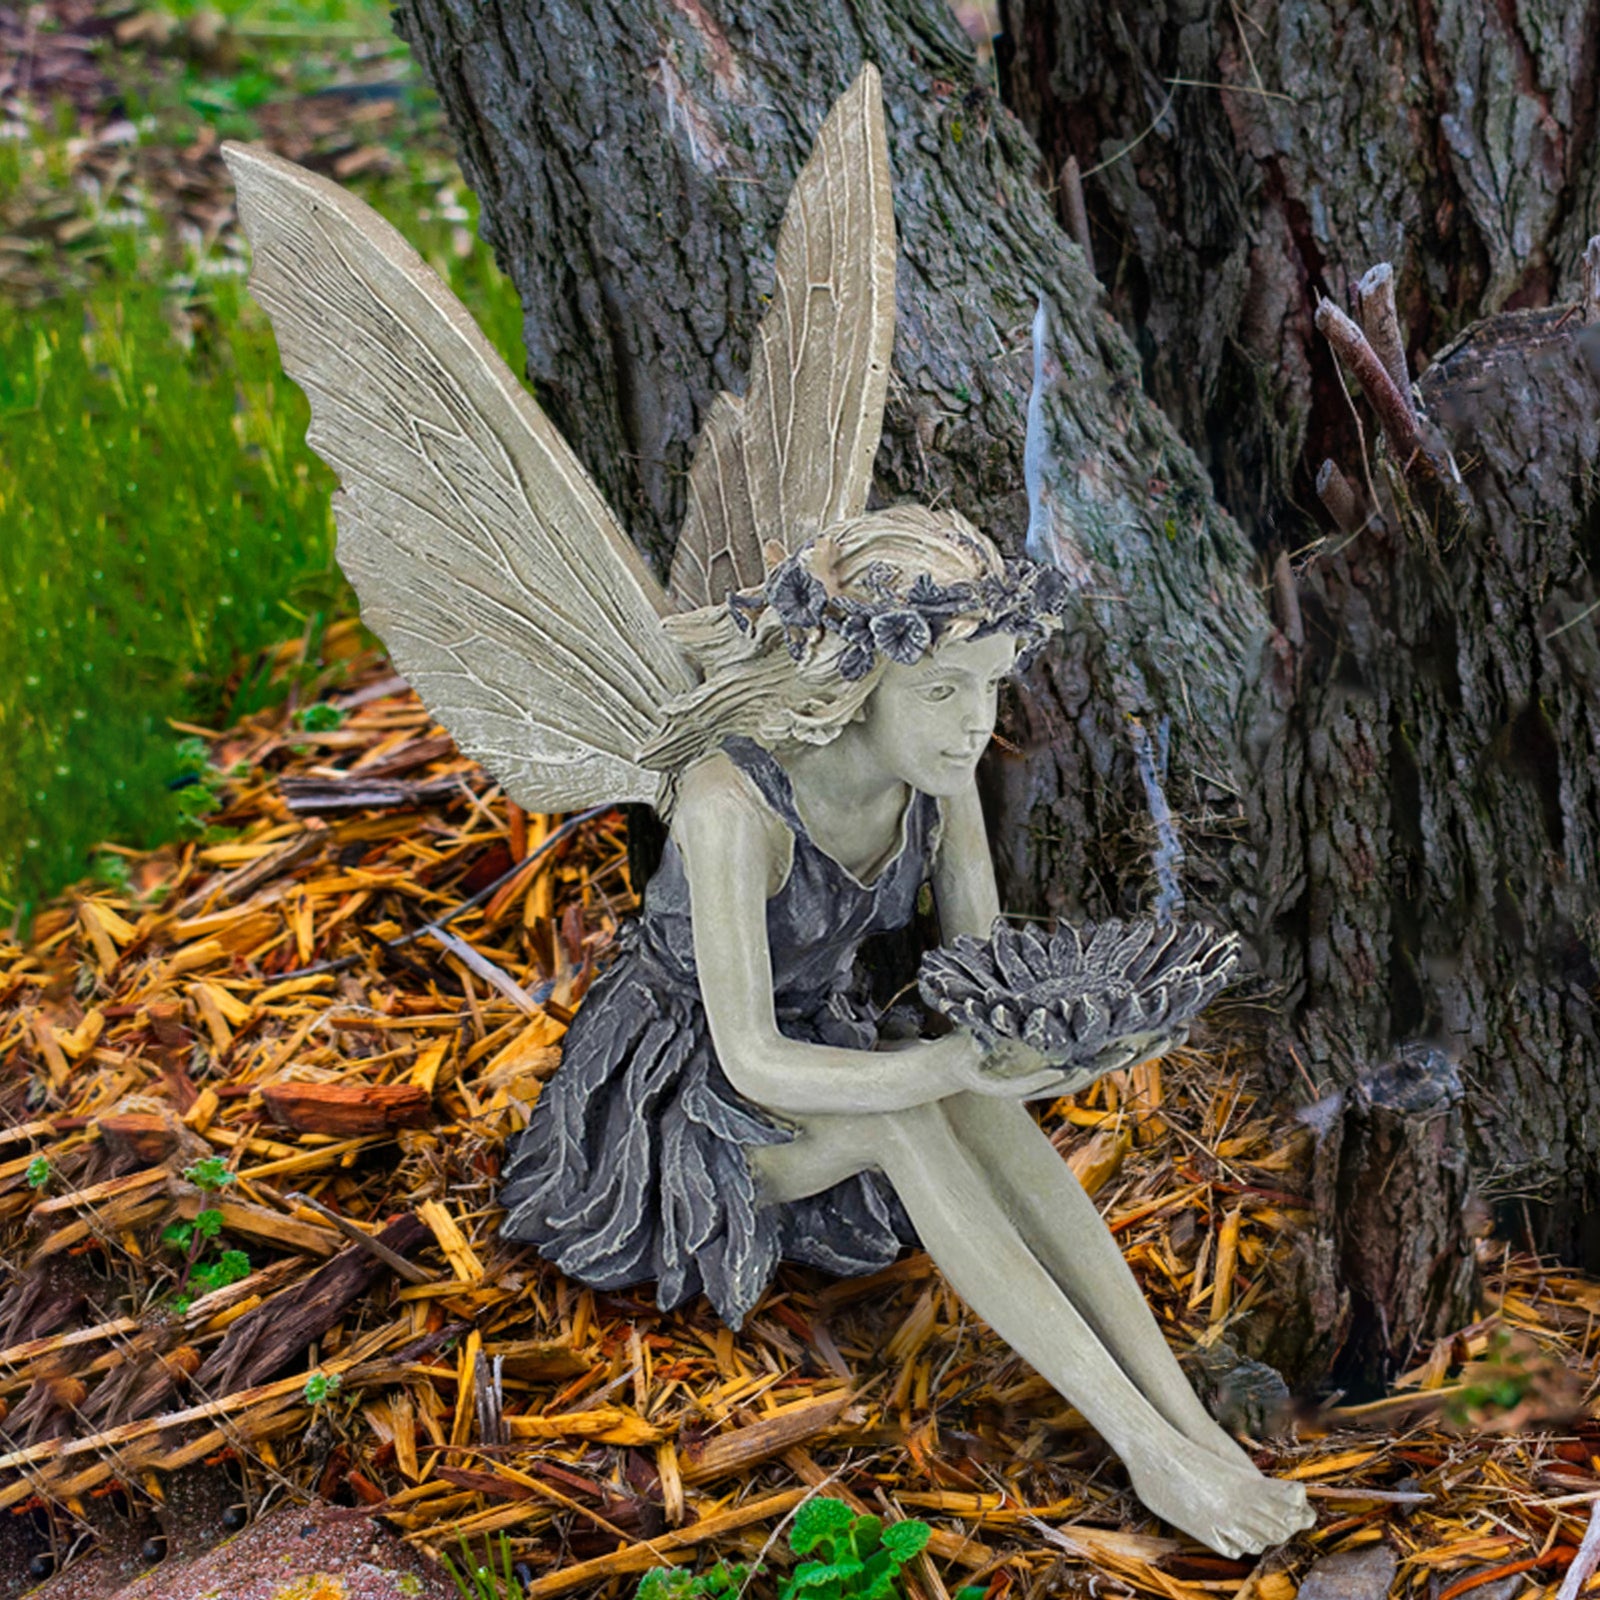 Fairy Sitting Garden Statue Ornament Decoration Resin Crafts Decor Accessories Home Landscaping Backyard Lawn Decoration